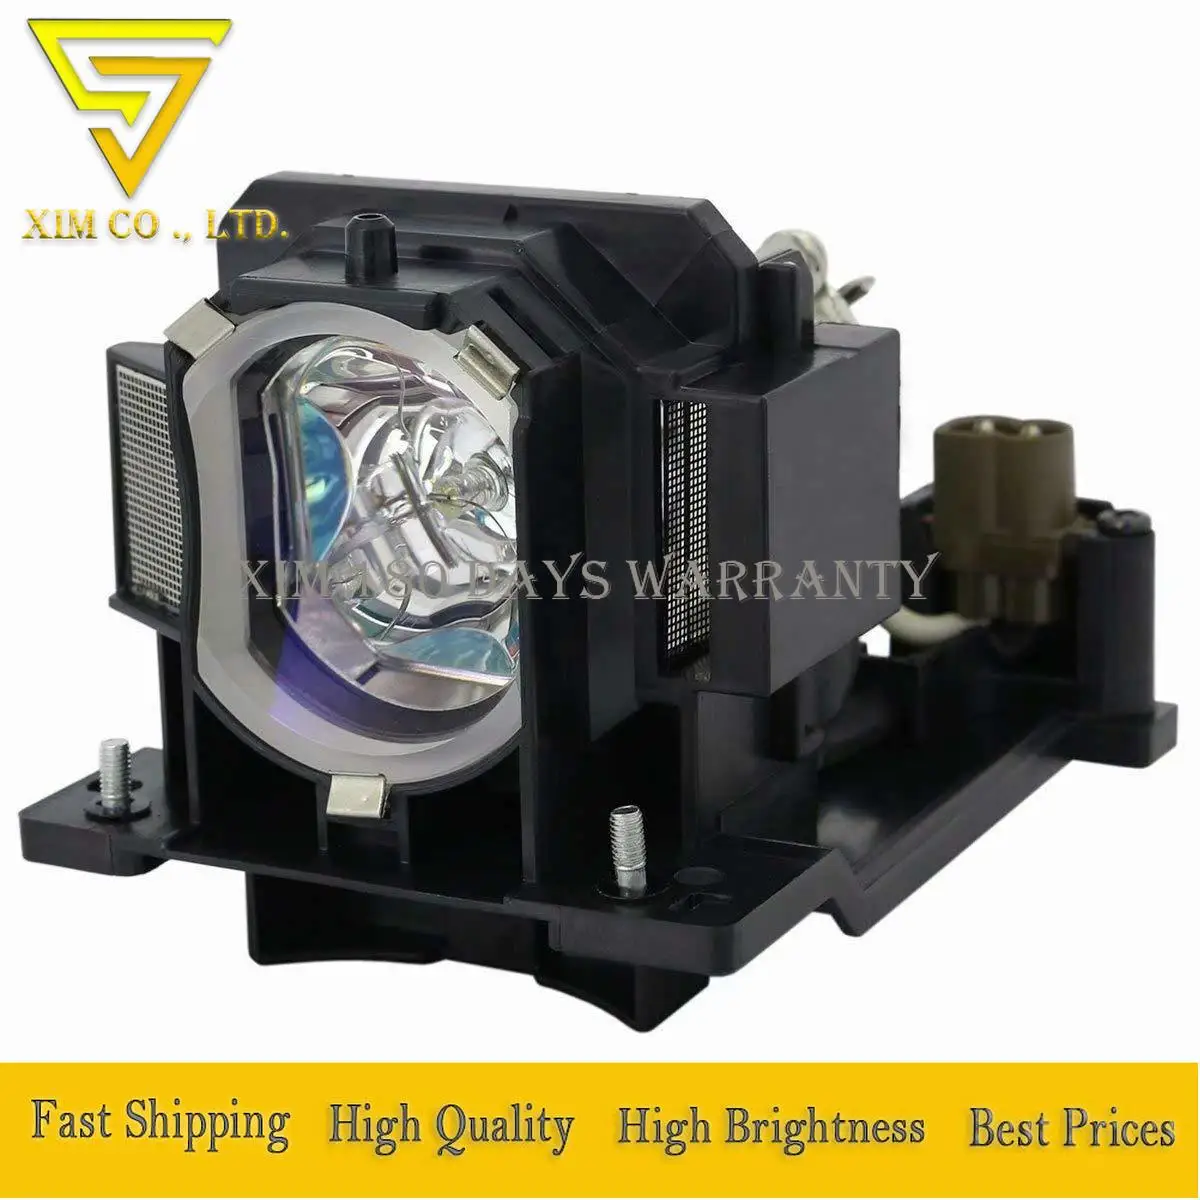 DT01091 Projector Lamp For Hitachi CP-AW100N CP-D10 CP-DW10 ED-AW100N ED-AW110N HCP-Q3 HCP-Q3W CP-DW1 high quality With Housing high quality dt01022 dt01026 replacement lamp with housing for hitachi cp rx80w cp rx78 ed x24 cp rx78w cp rx80 projectors